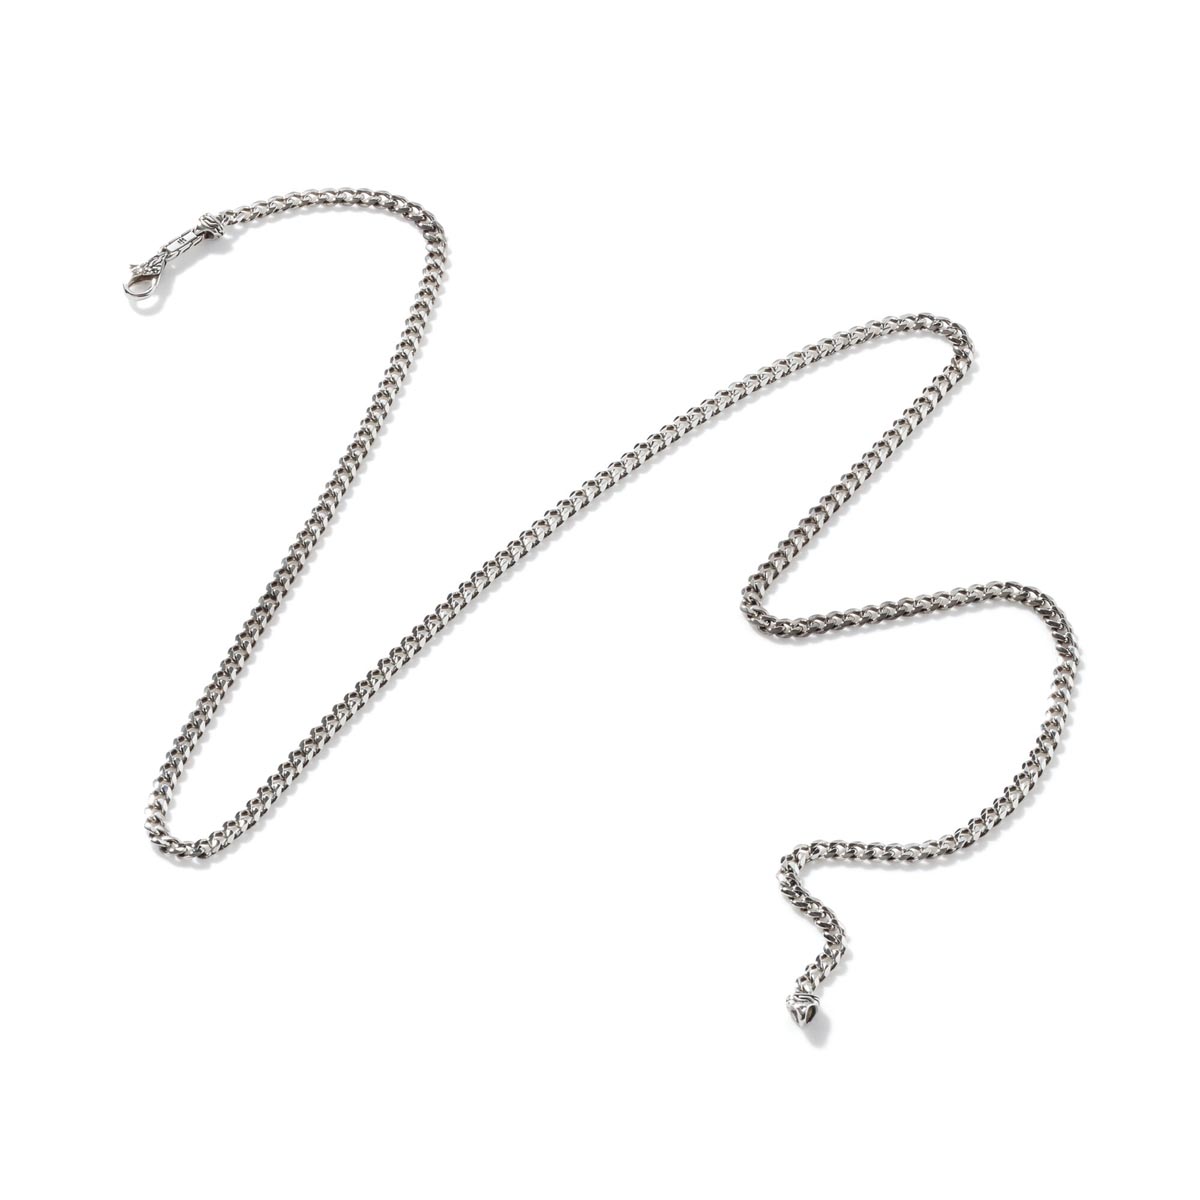 John Hardy Classic Chain Collection Curb Chain in Sterling Silver (22 inches and 3.9mm wide)